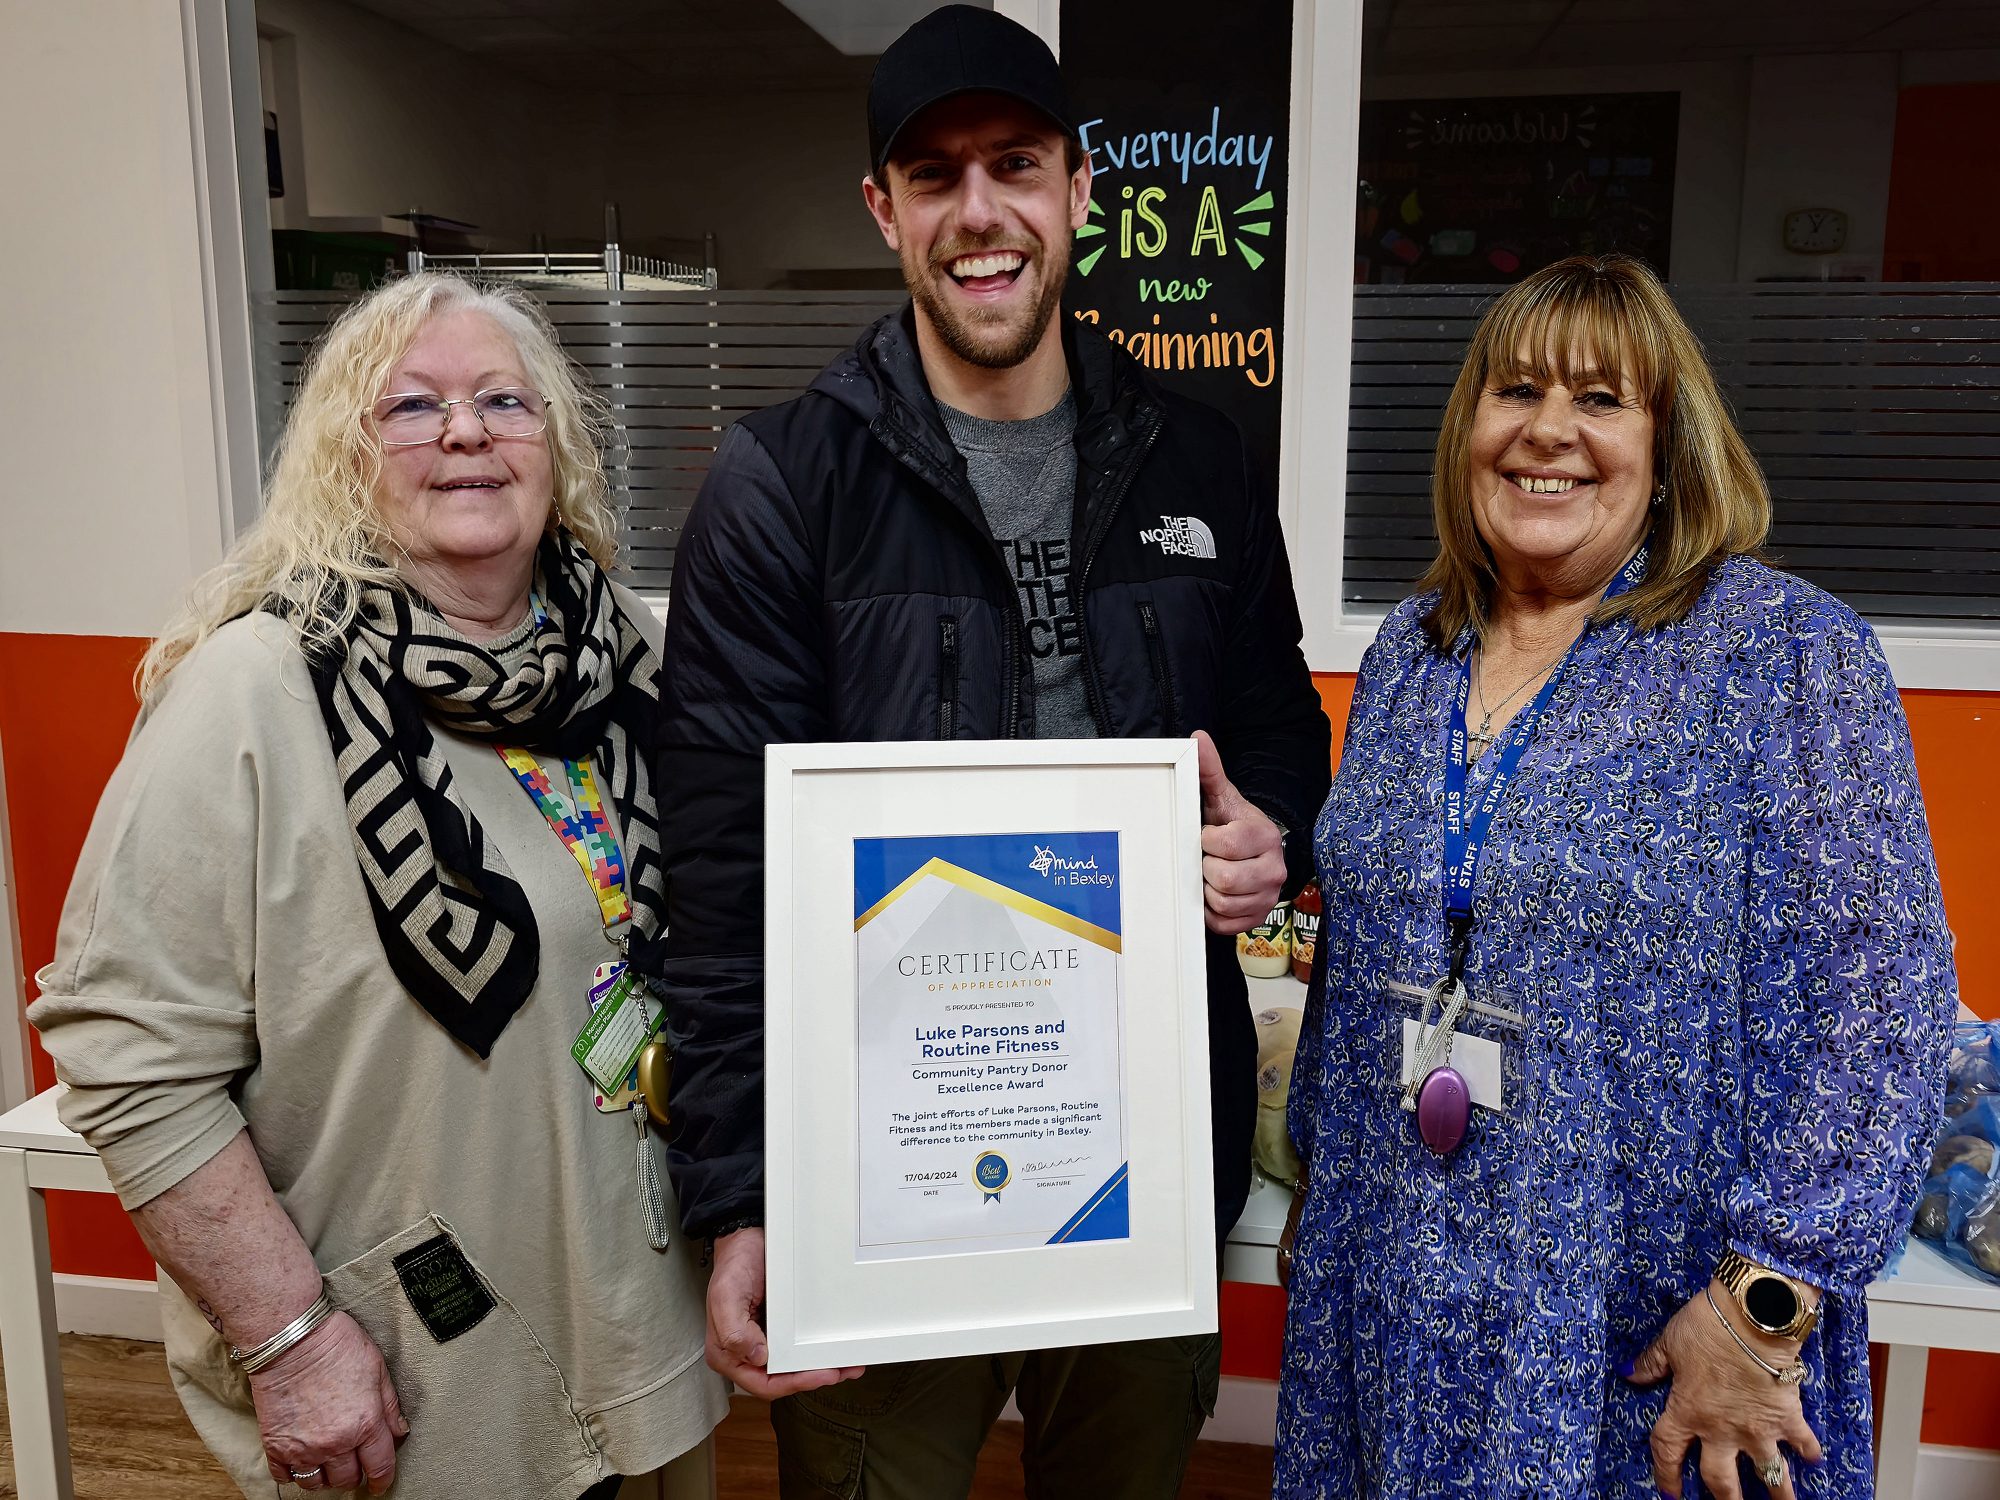 Luke Parsons from Routine Fitness pictured with his certificate and stood with Sue and Viv from Mind in Bexley